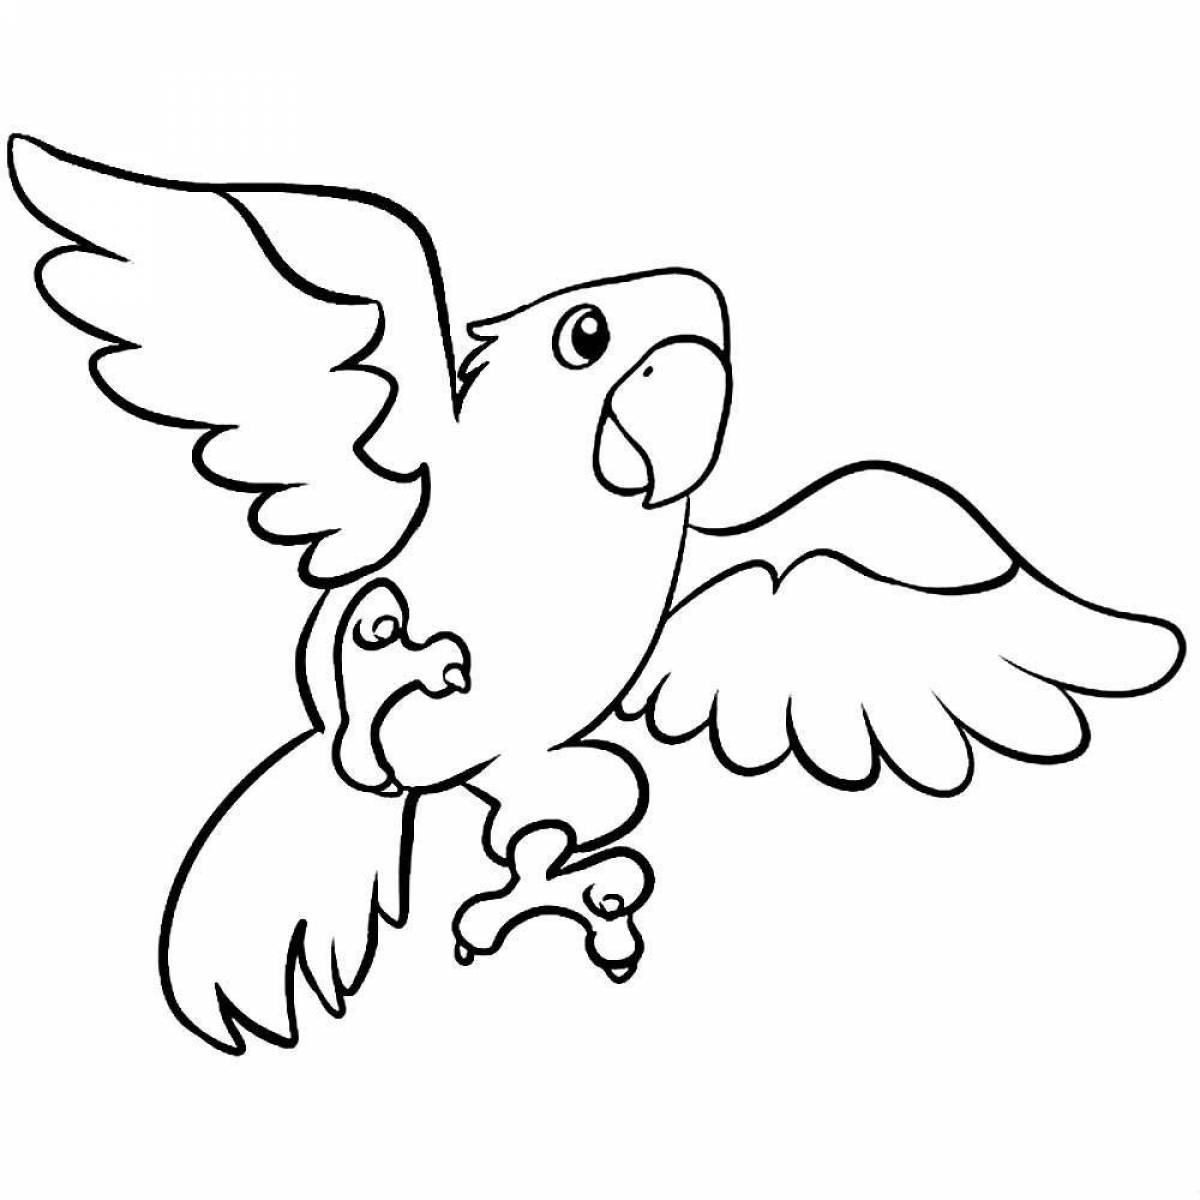 Creative parrot coloring book for kids